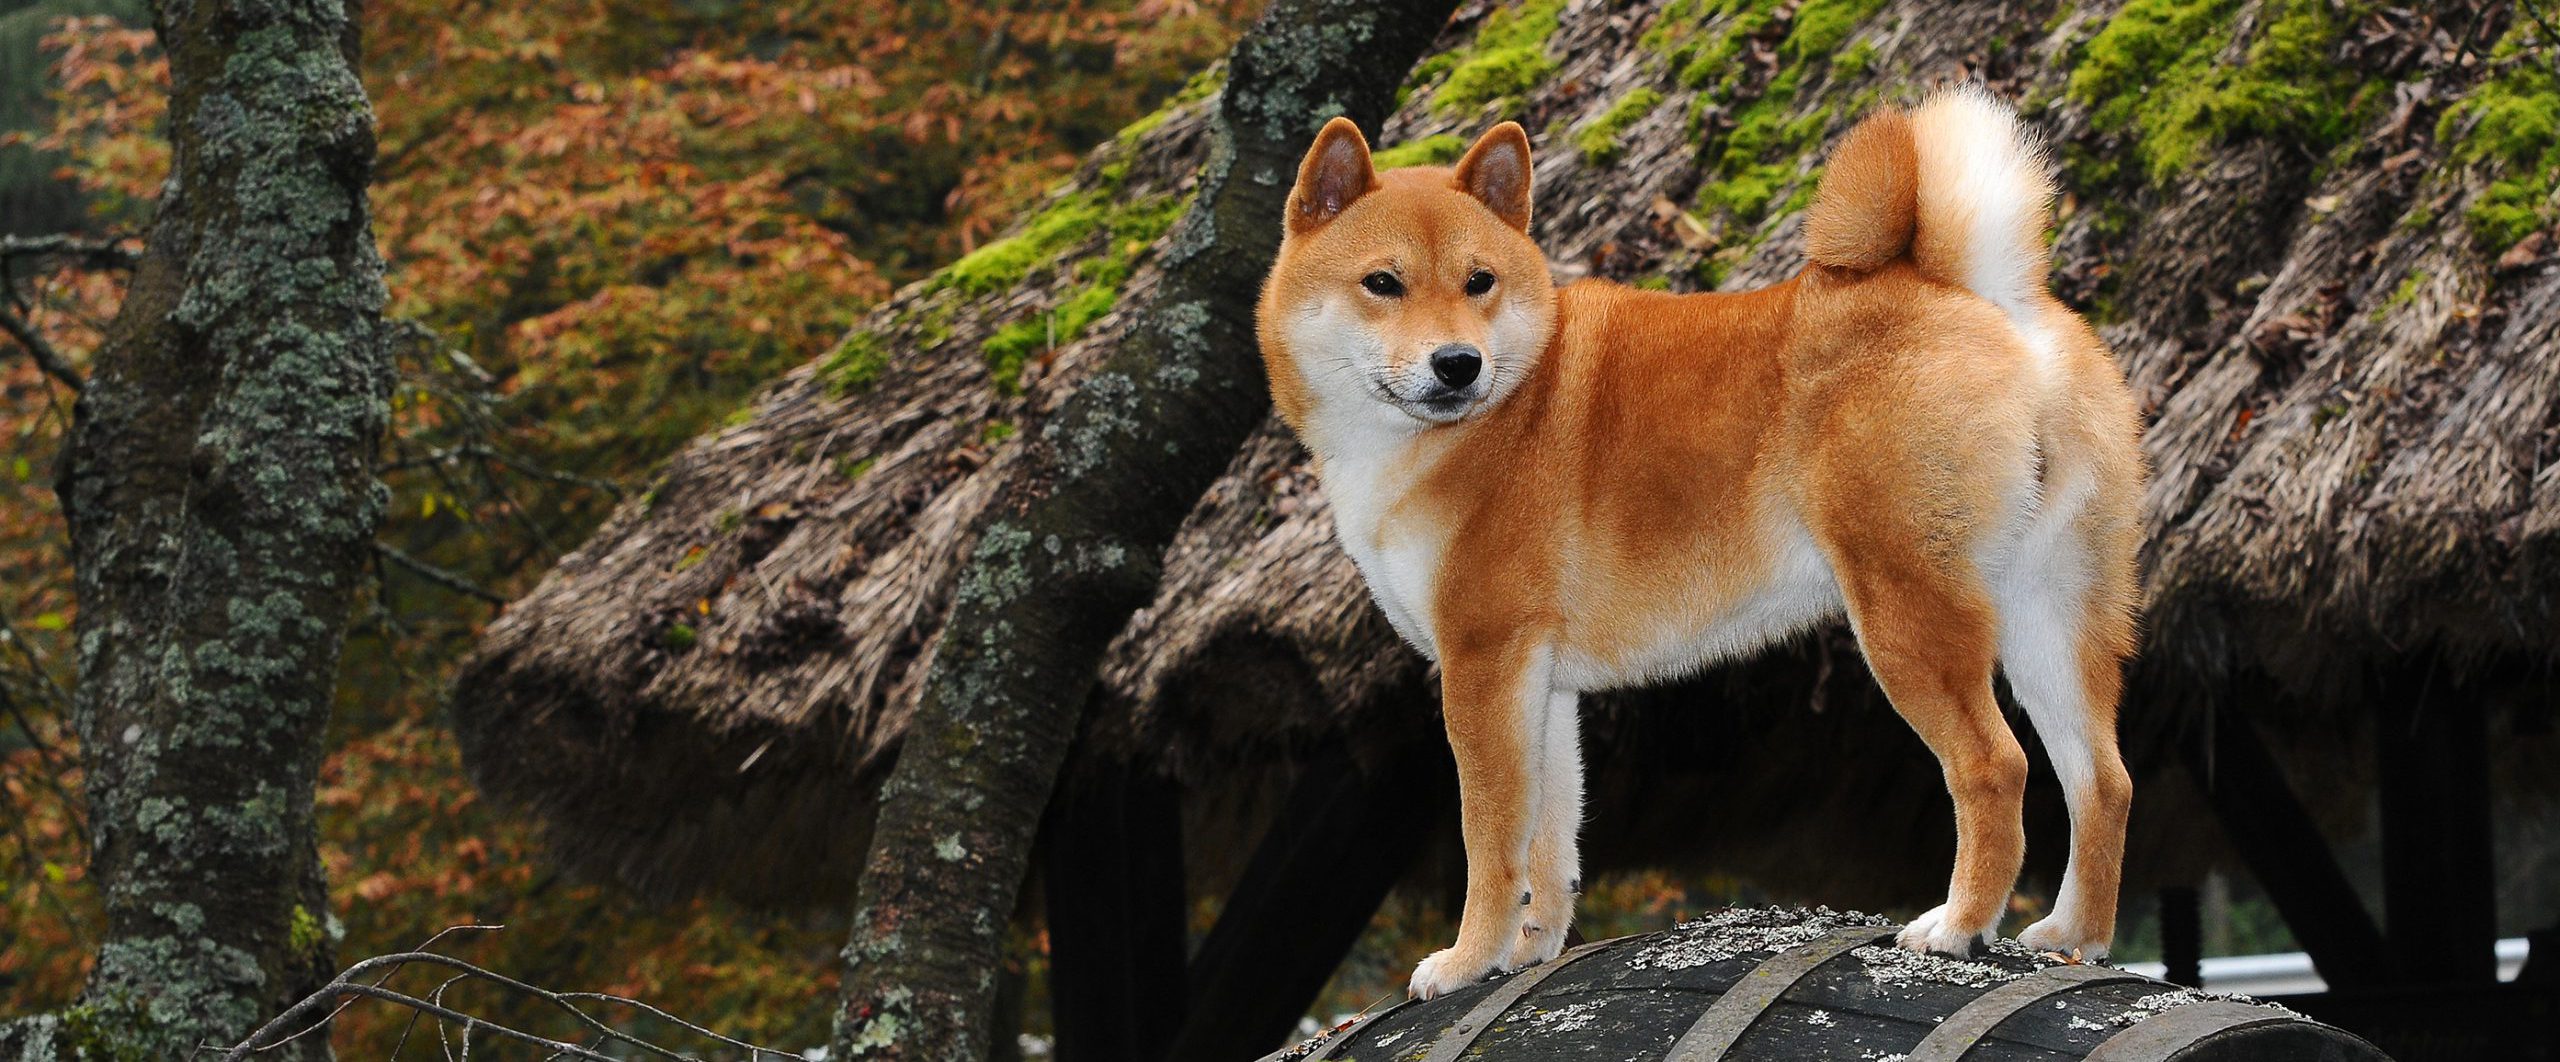 The Shiba Inu Care Guide: Personality, History, Food, and More - The